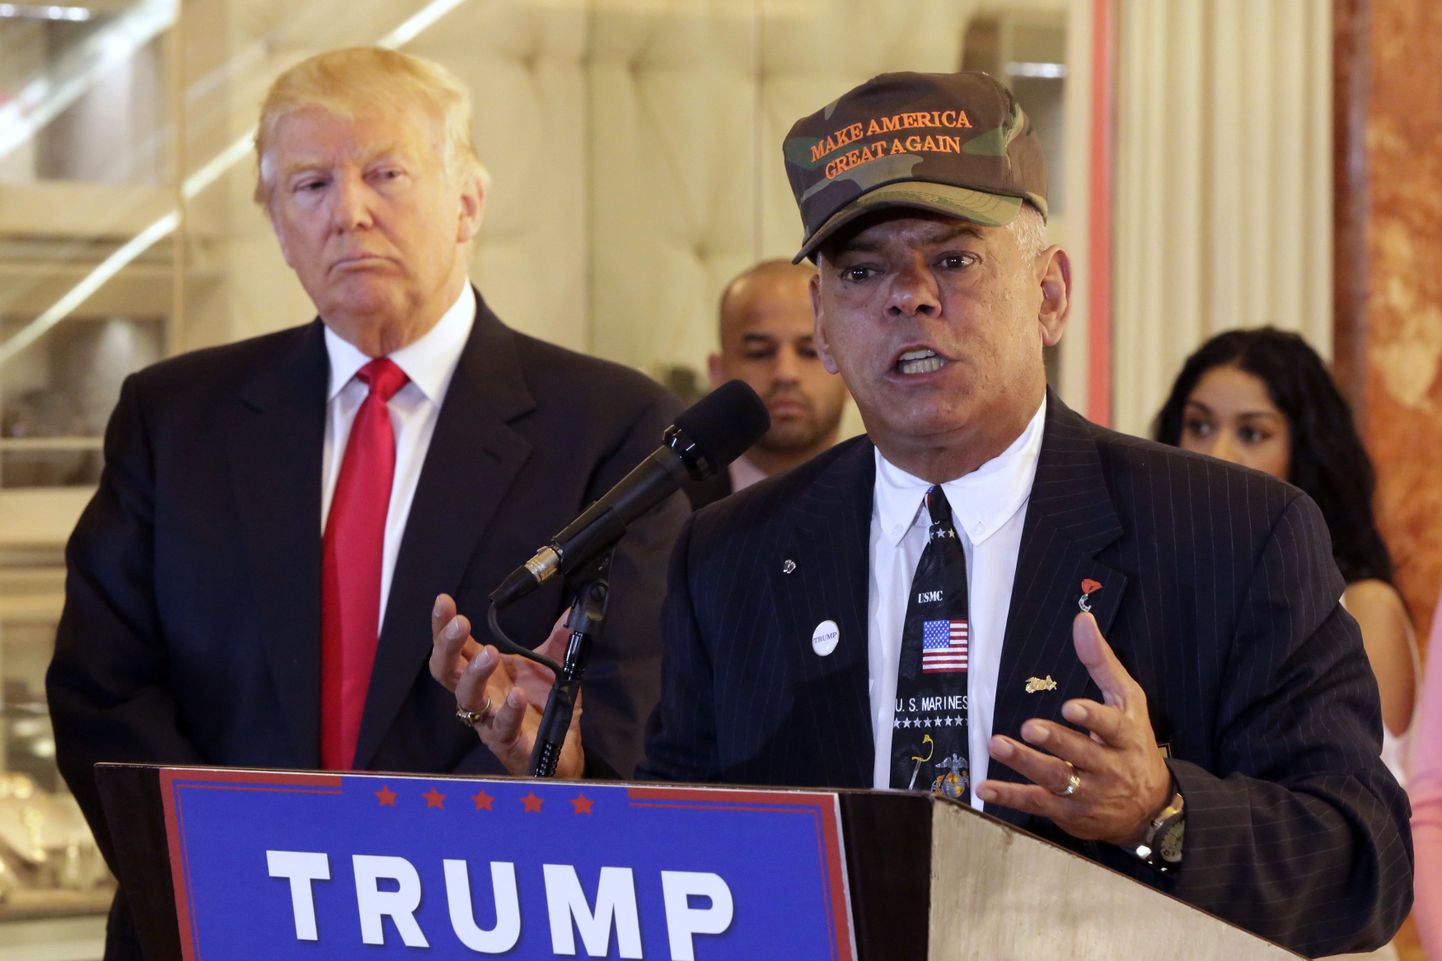 FILE - In this May 31, 2016, file photo, Republican presidential candidate Donald Trump listens at left as Al Baldasaro, a New Hampshire state representative, speaks during a news conference in New York. Baldasaro said on a Boston radio program on July 19 that Hillary Clinton should be